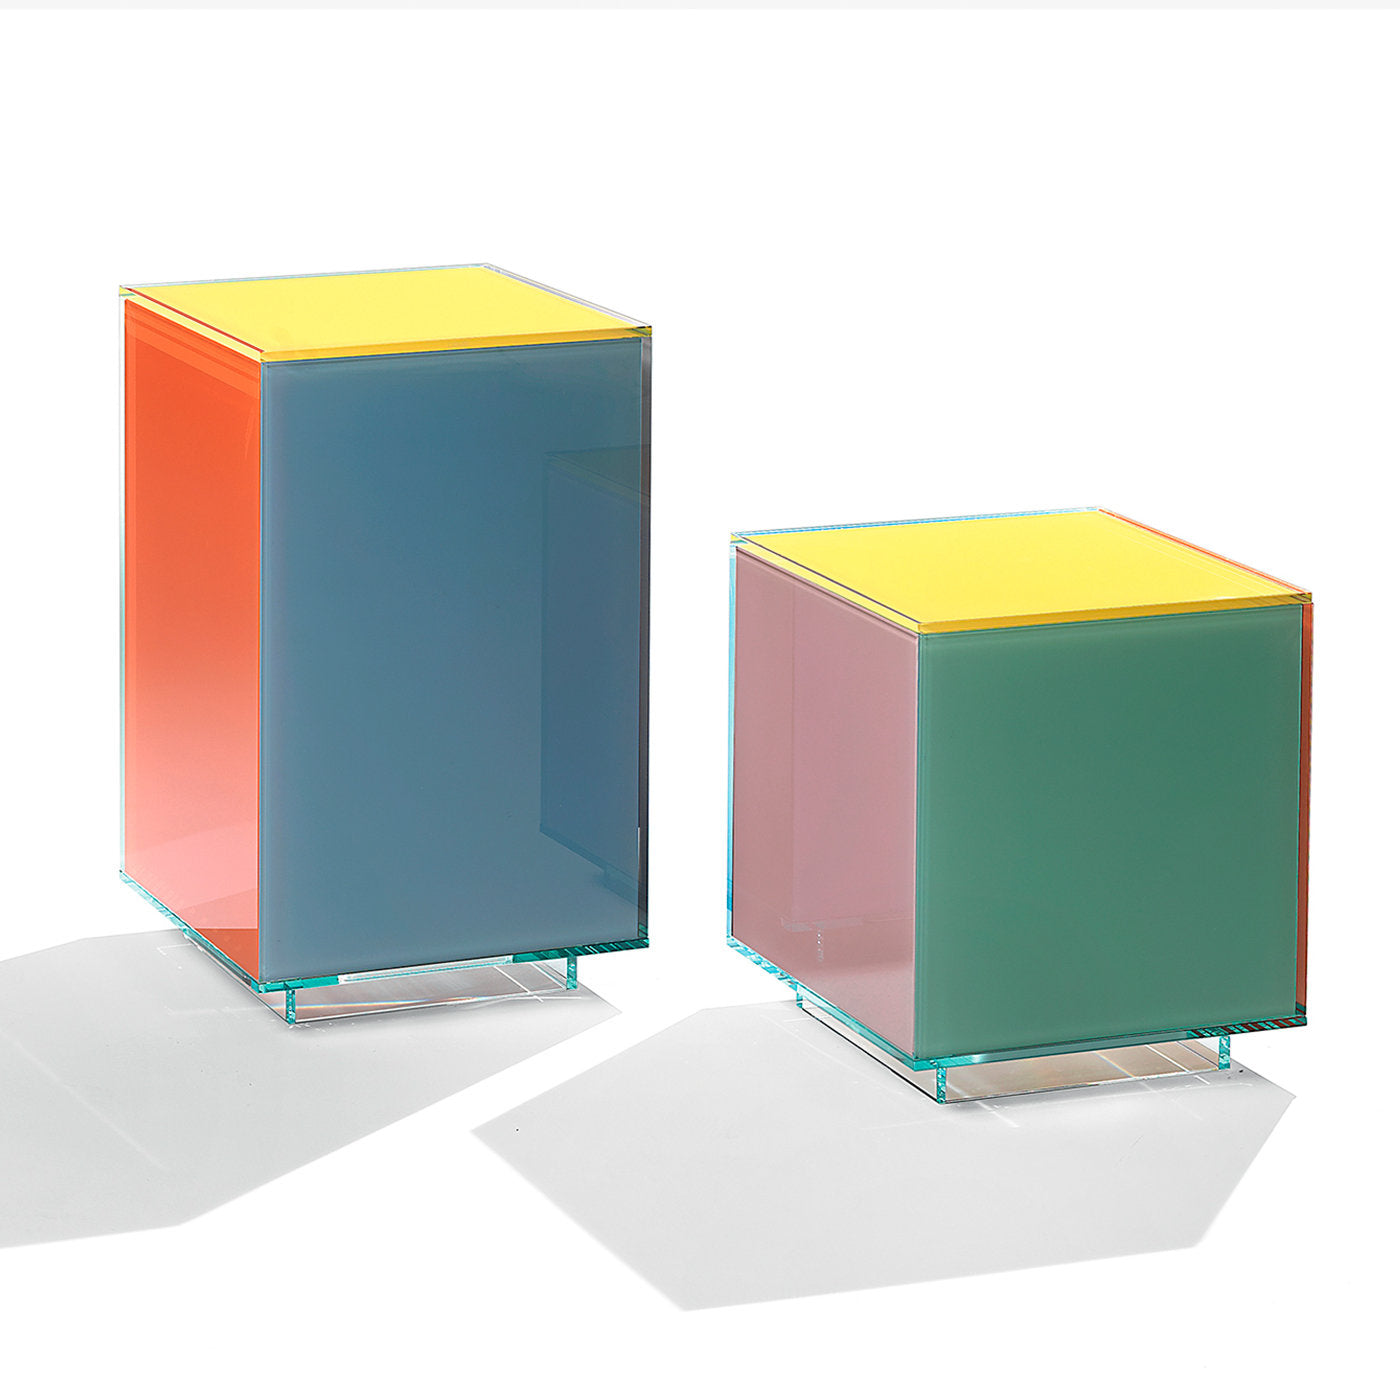 Cubicolor Large Side Table by Daniele Merini - Alternative view 1